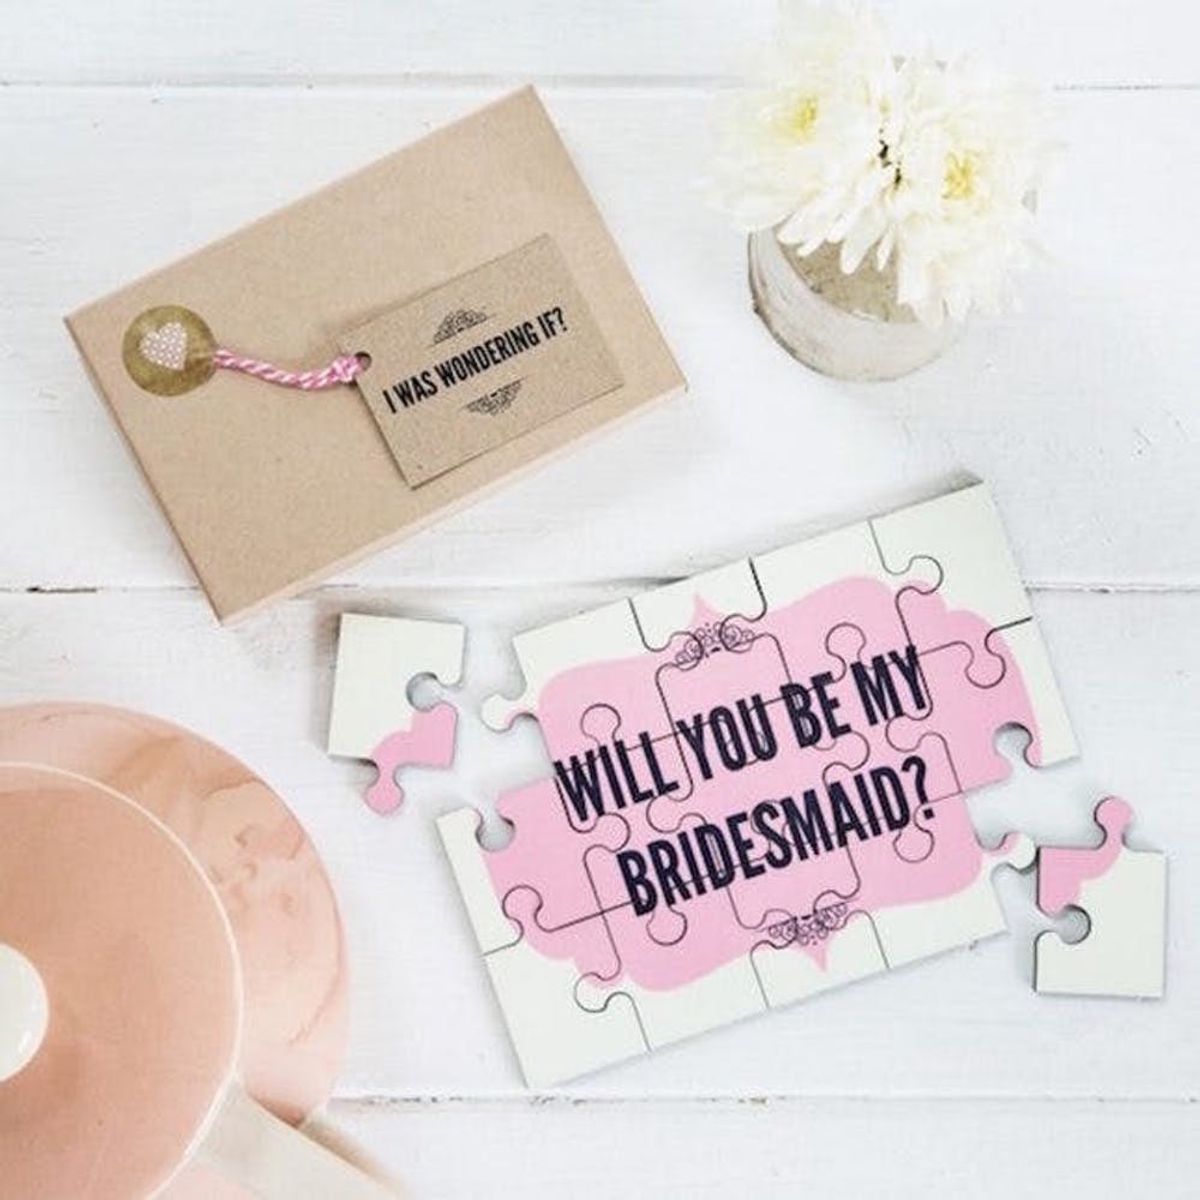 8 DIY “Will You Be My Bridesmaid?” Gifts That Your Besties Will LOVE